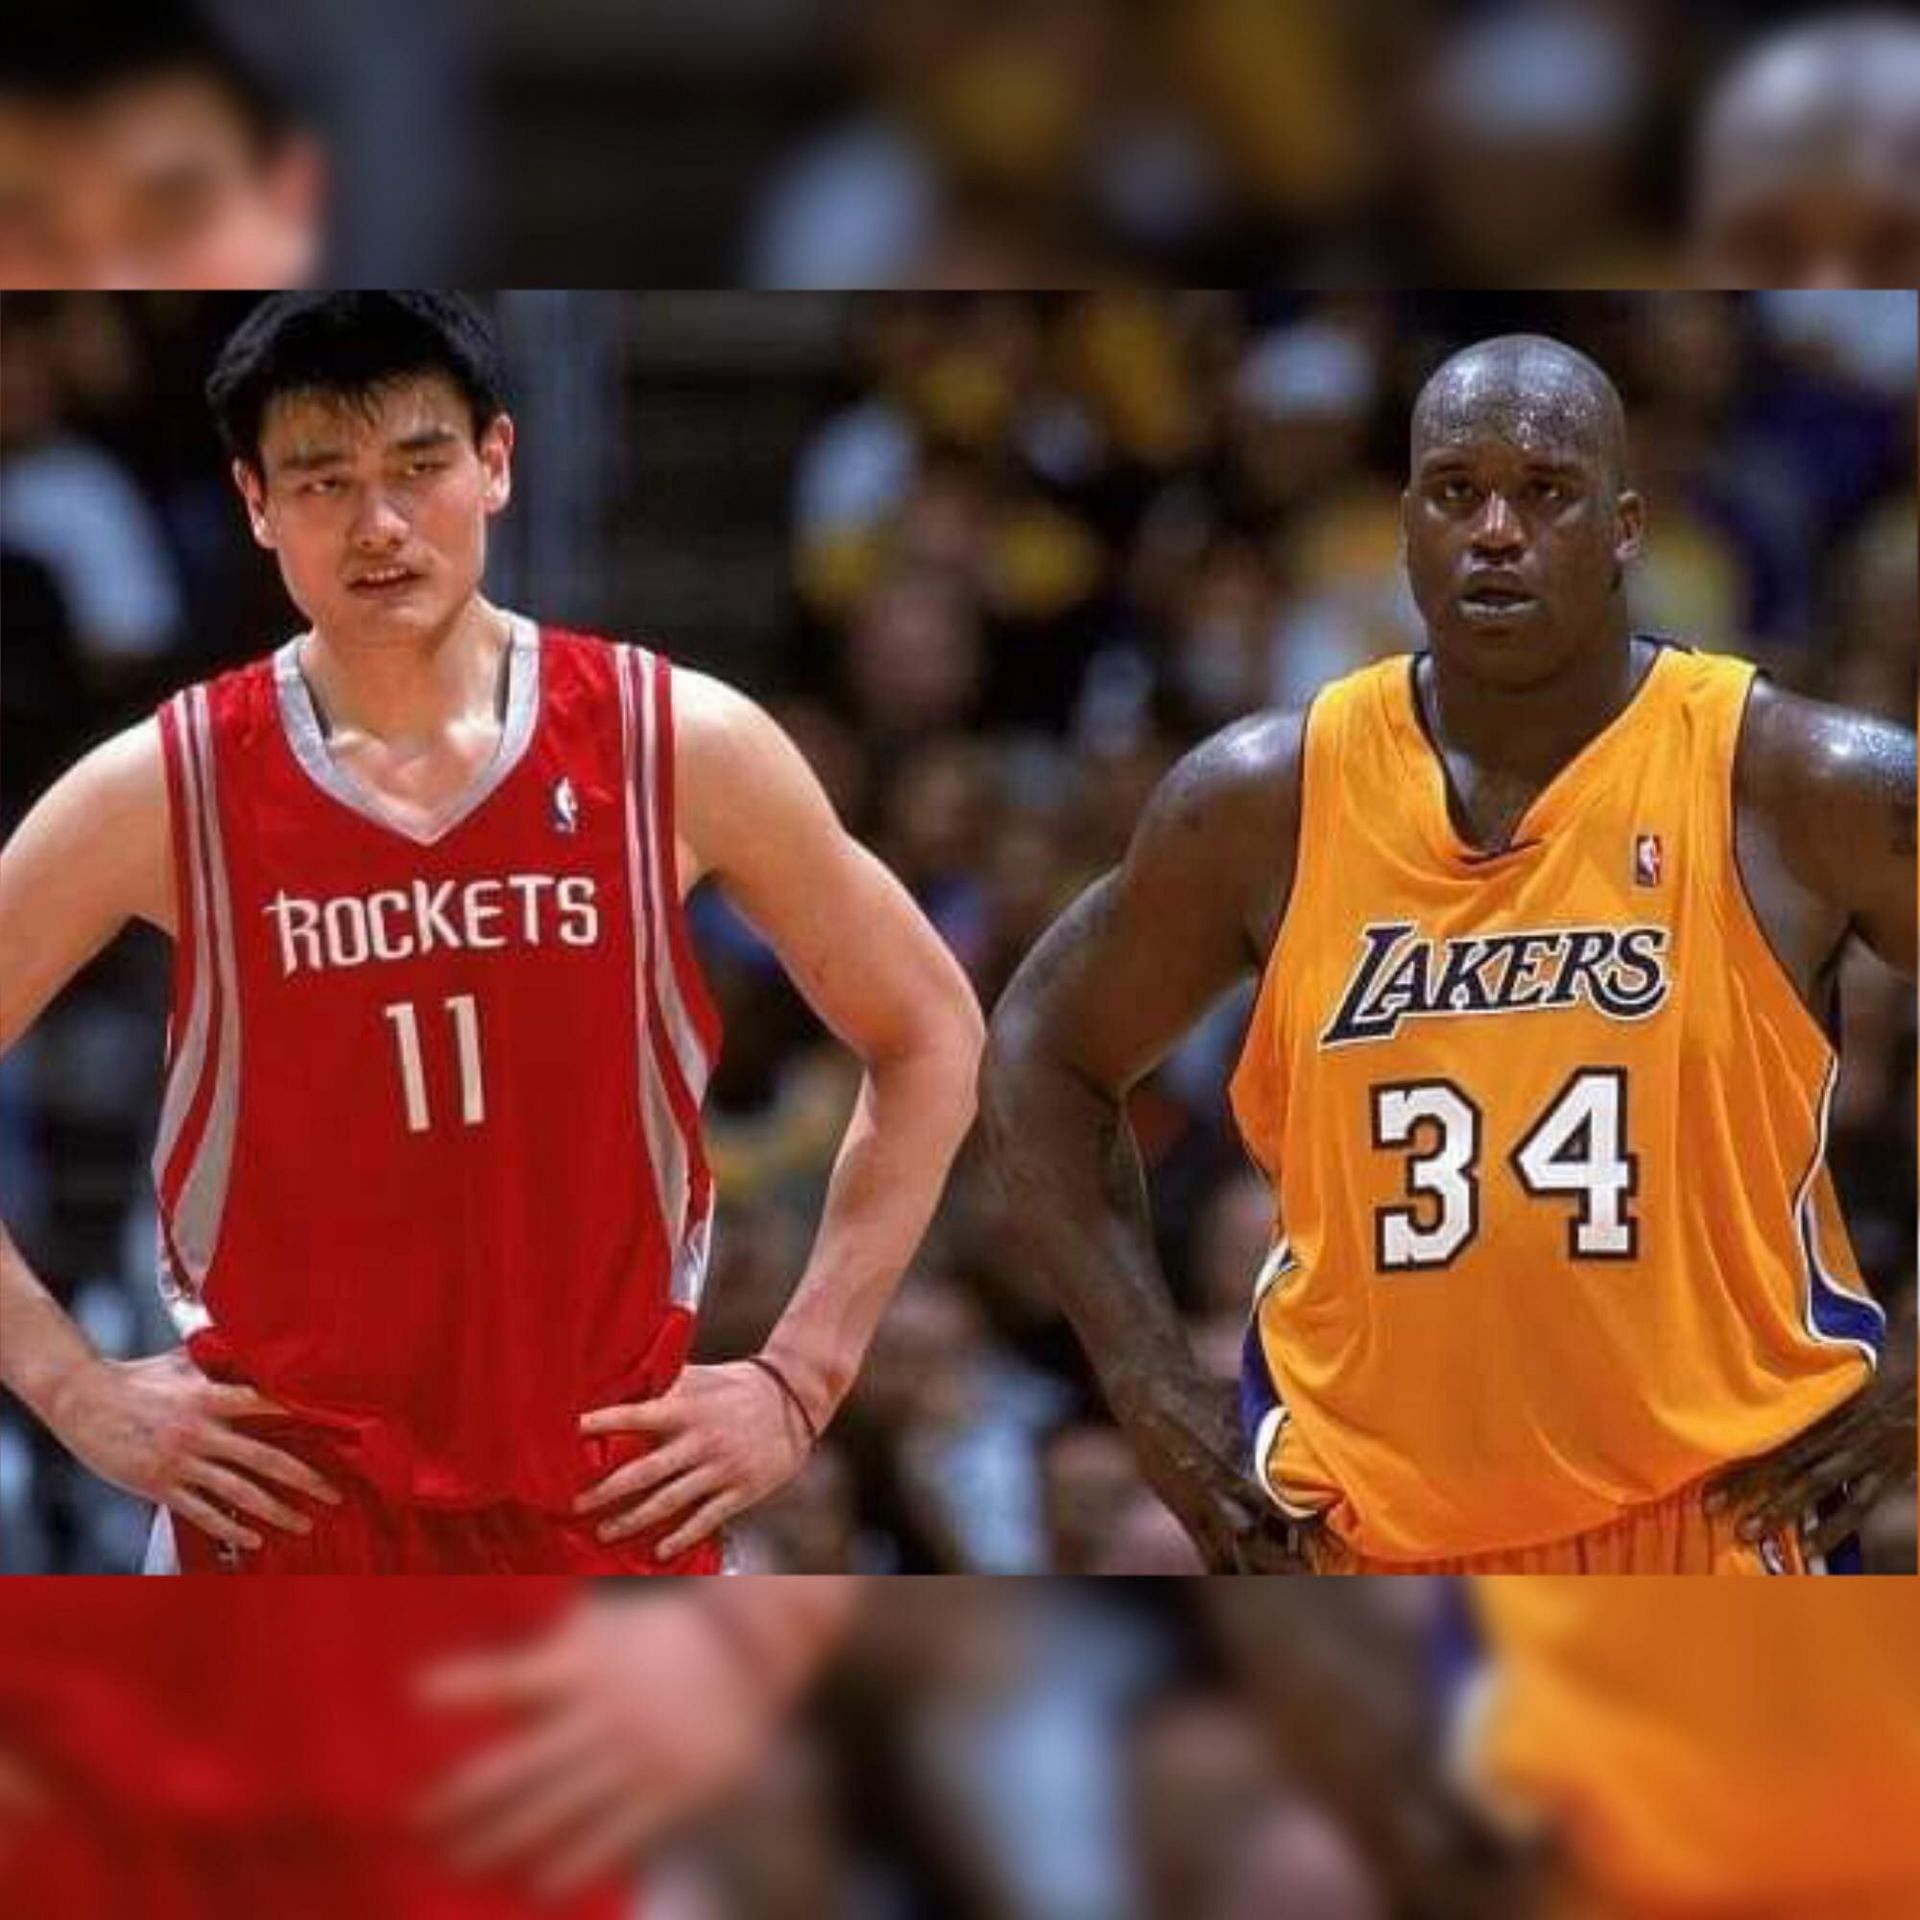 7-foot-6 Yao Ming and 7-foot-1 Shaquille O